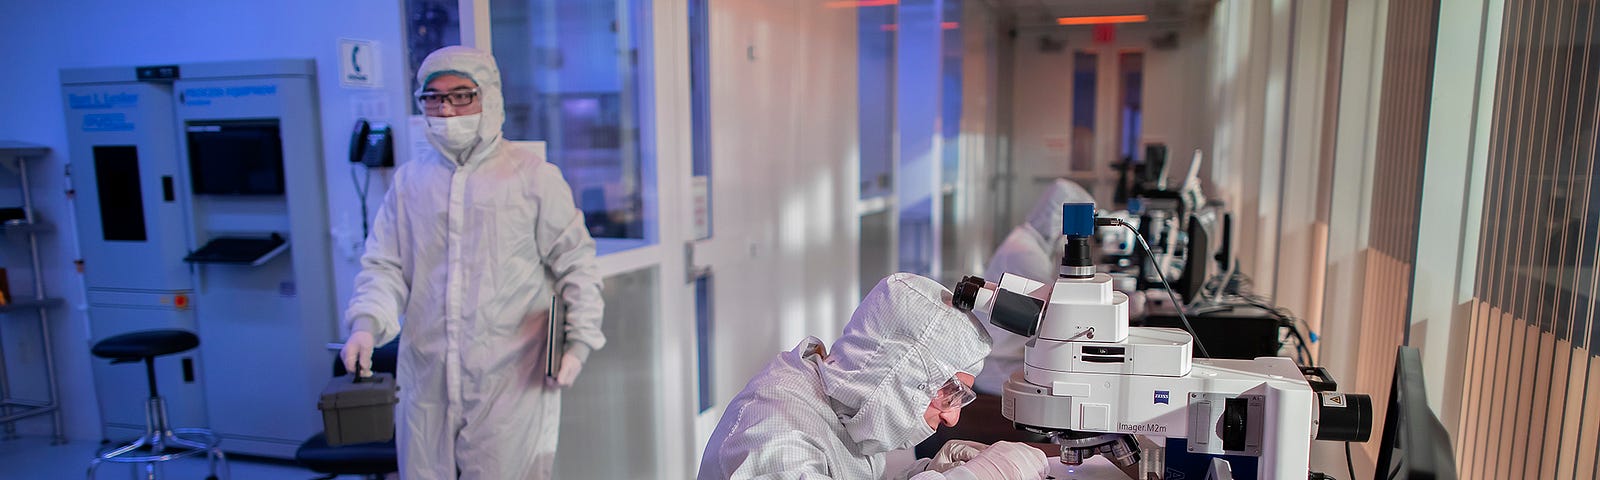 Singh Center researchers work in head-to-toe cleanroom suits.